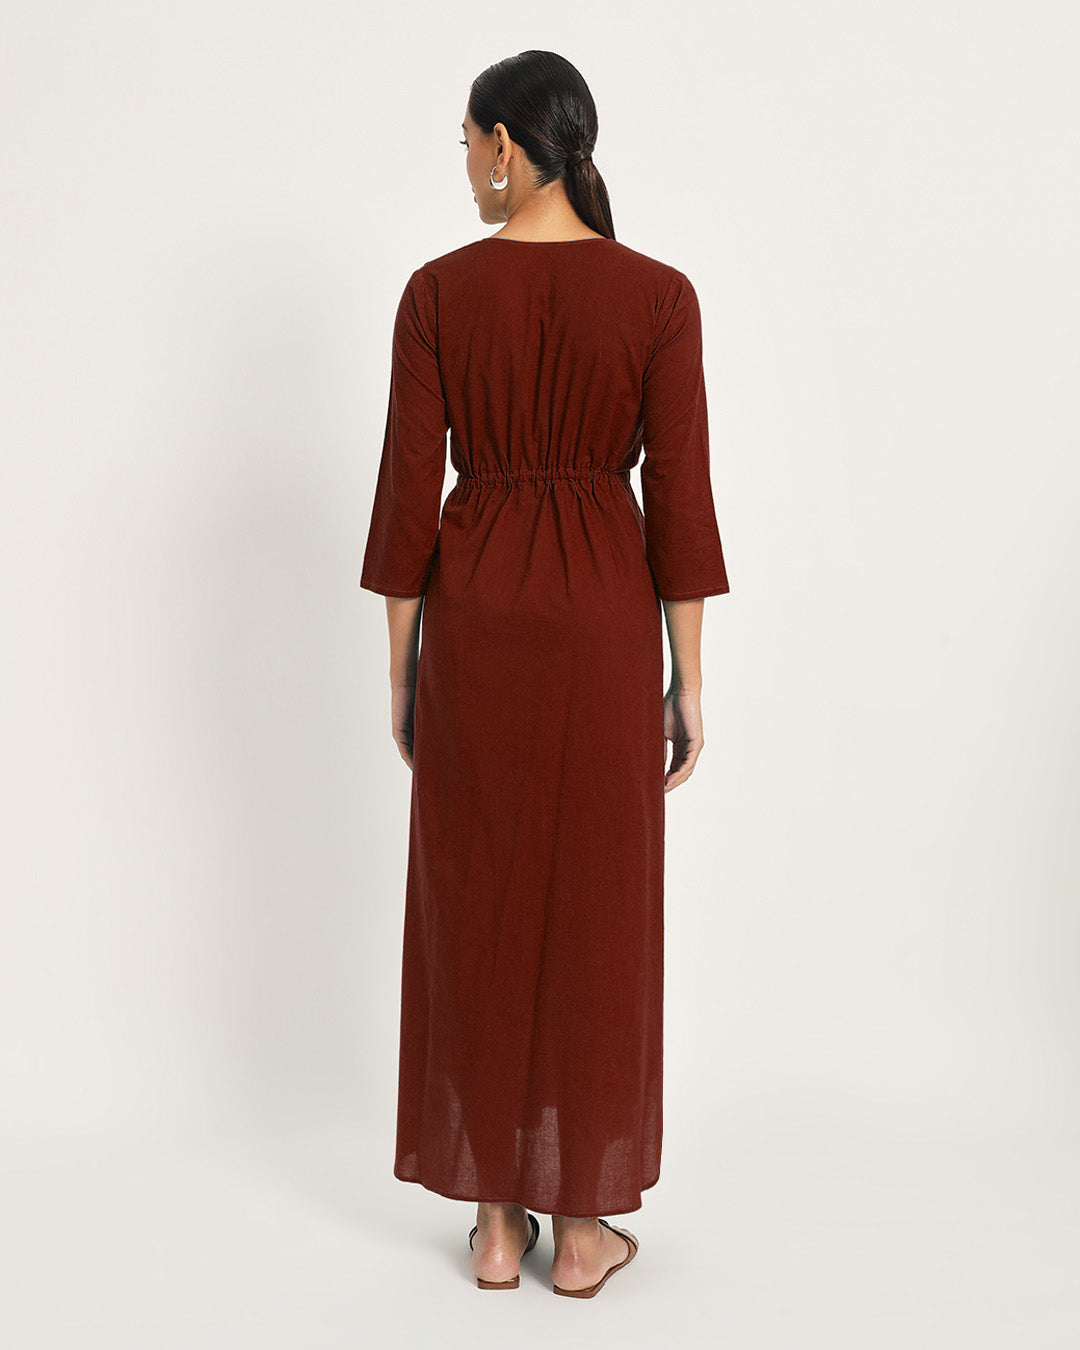 Combo: Russet Red & Sage Green Lazy Daydream Nightdress